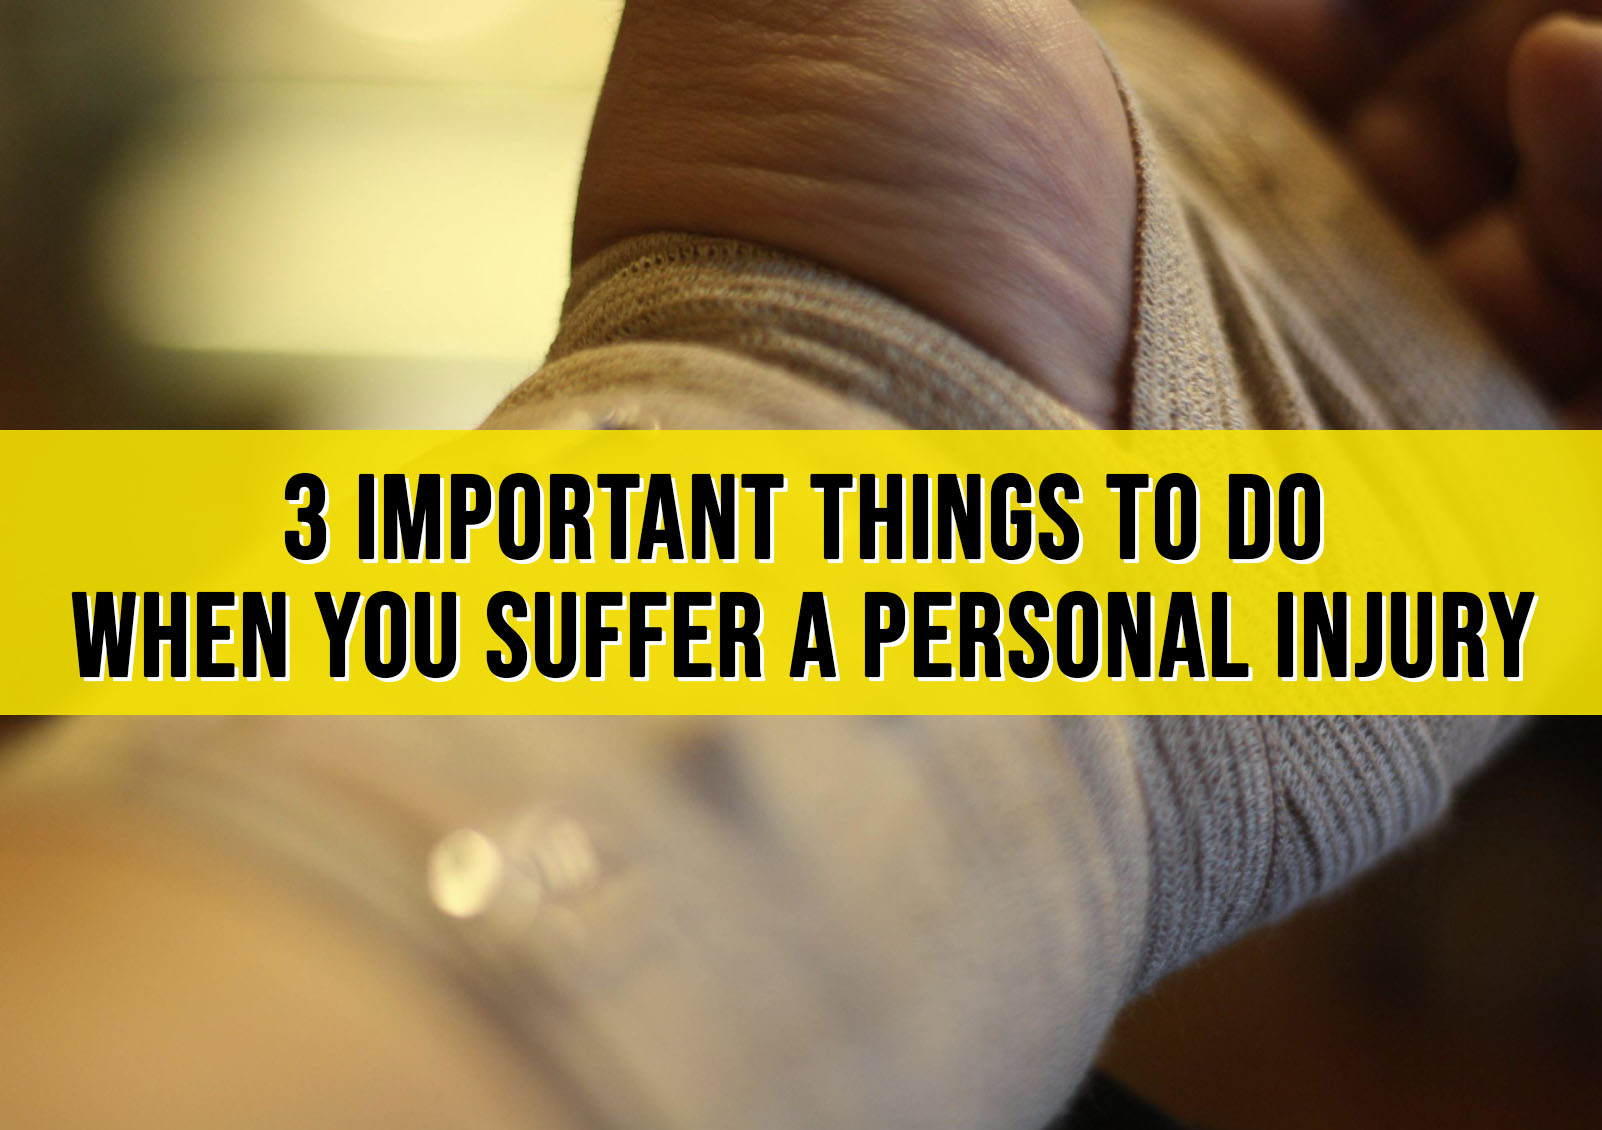 3 Important Things to Do When You Suffer a Personal Injury